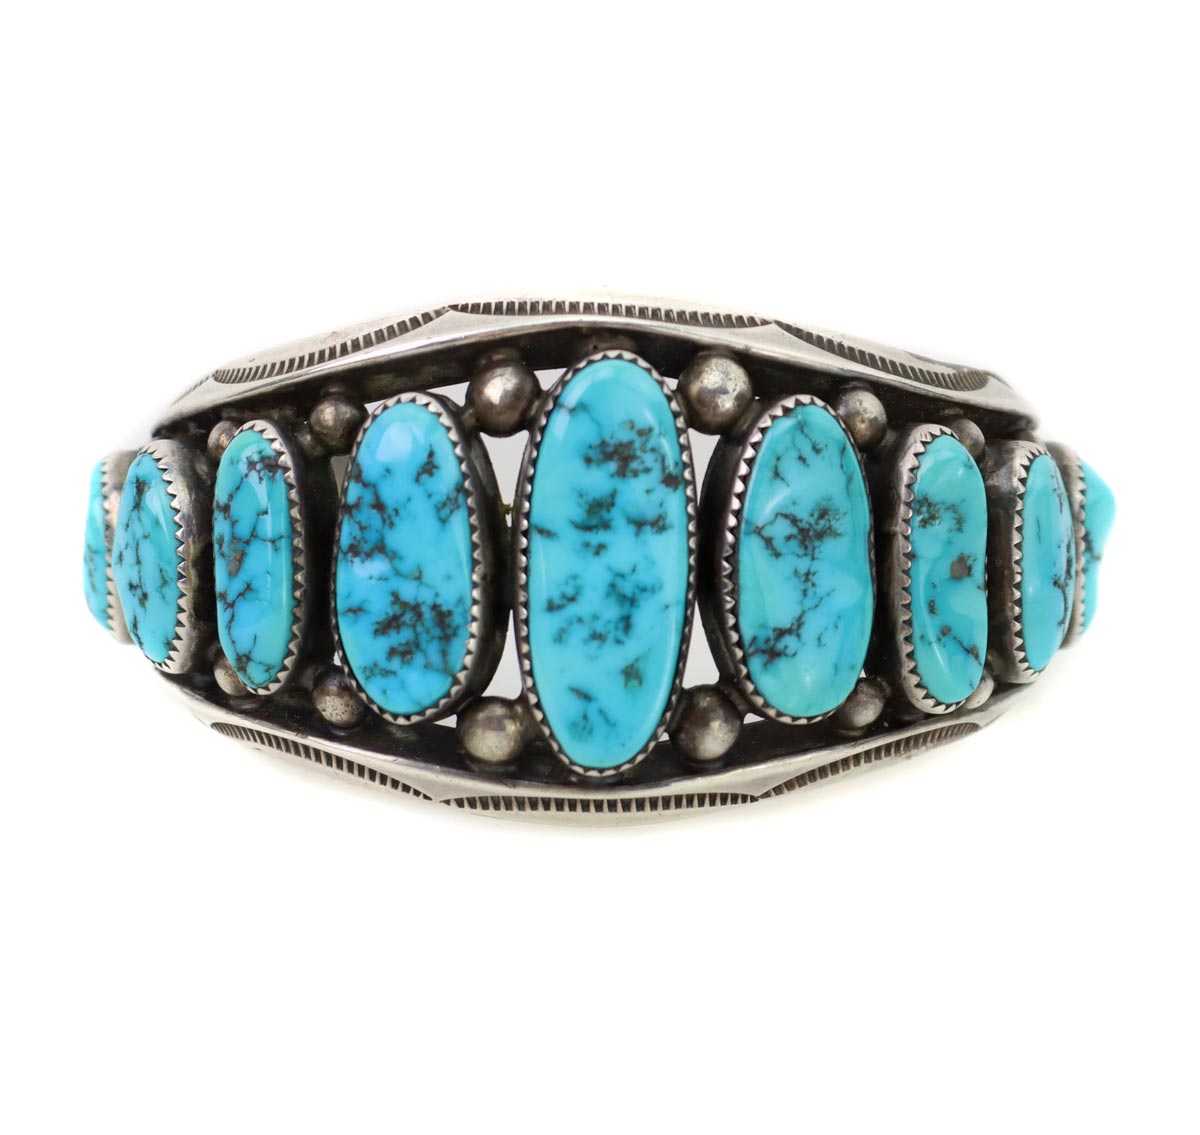 Orville Tsinnie (1943-2017) - Navajo Turquoise and Sterling Silver Bracelet with Stamped Design c. 1990-2000s, size 6.75 (J15079)
